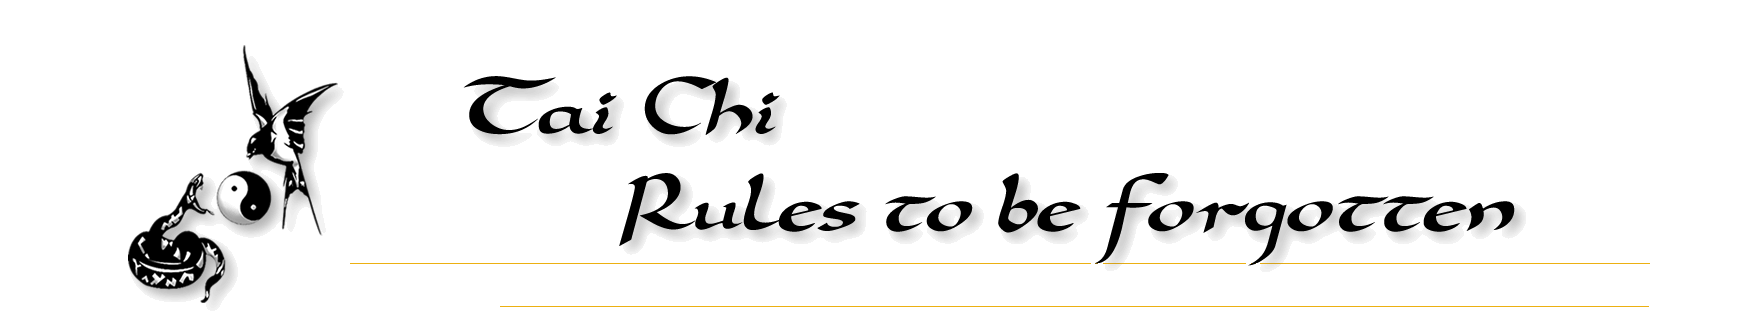 Tai Chi Rules To Be Forgotten